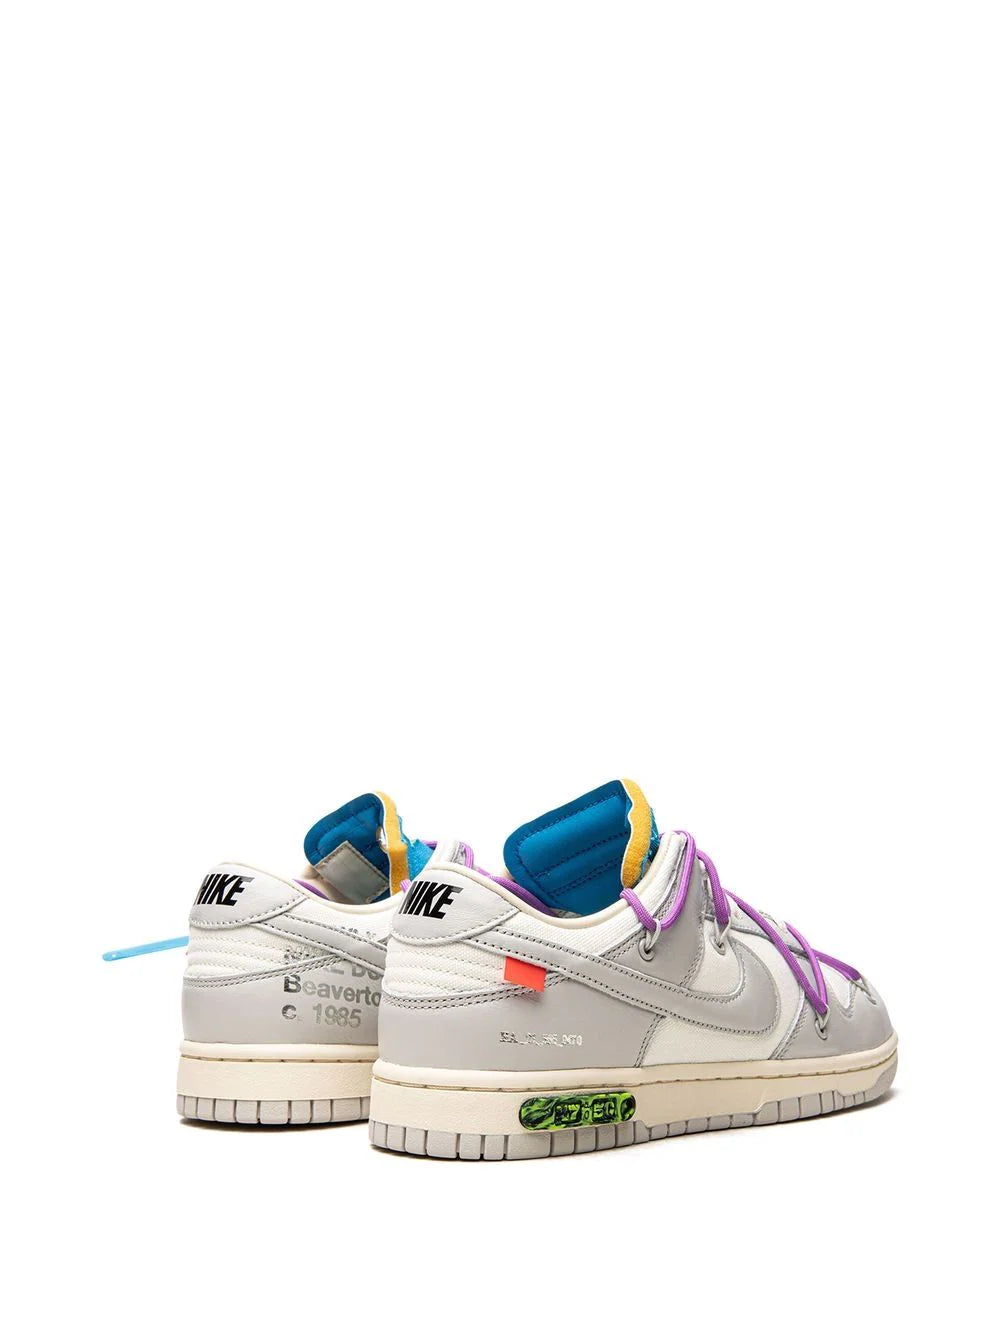 Nike X Off-White lot 47 of 50